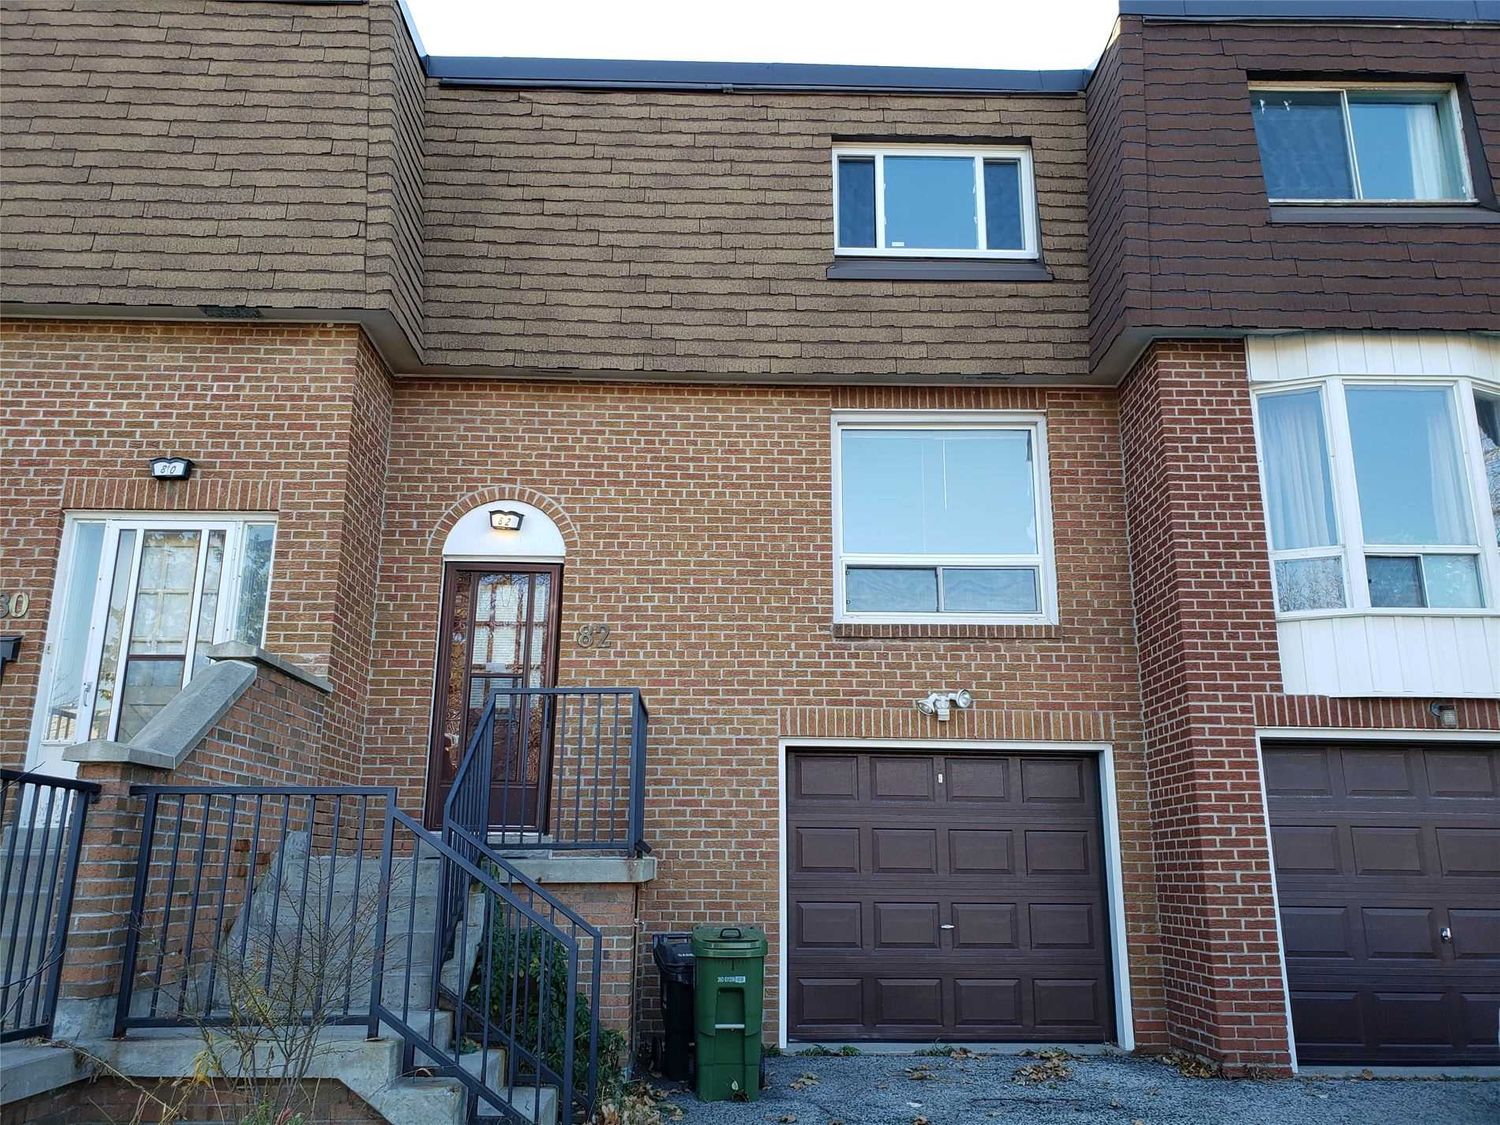 2-90 Crockamhill Drive. Crockamhill Drive Townhomes is located in  Scarborough, Toronto - image #2 of 2